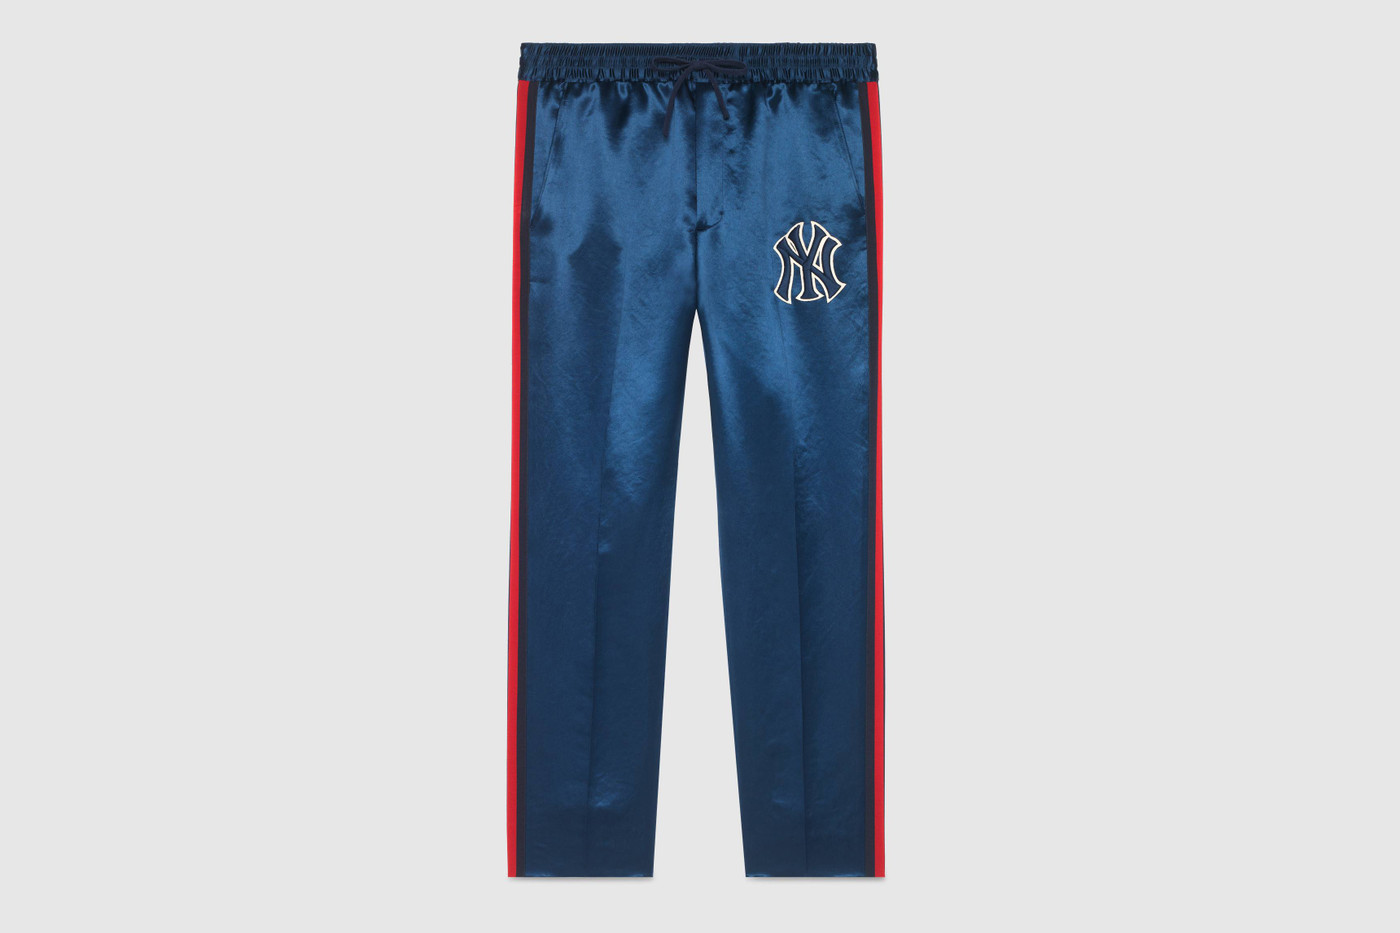 Gucci Extends On Its Love For the NY Yankees With a New Capsule Collection